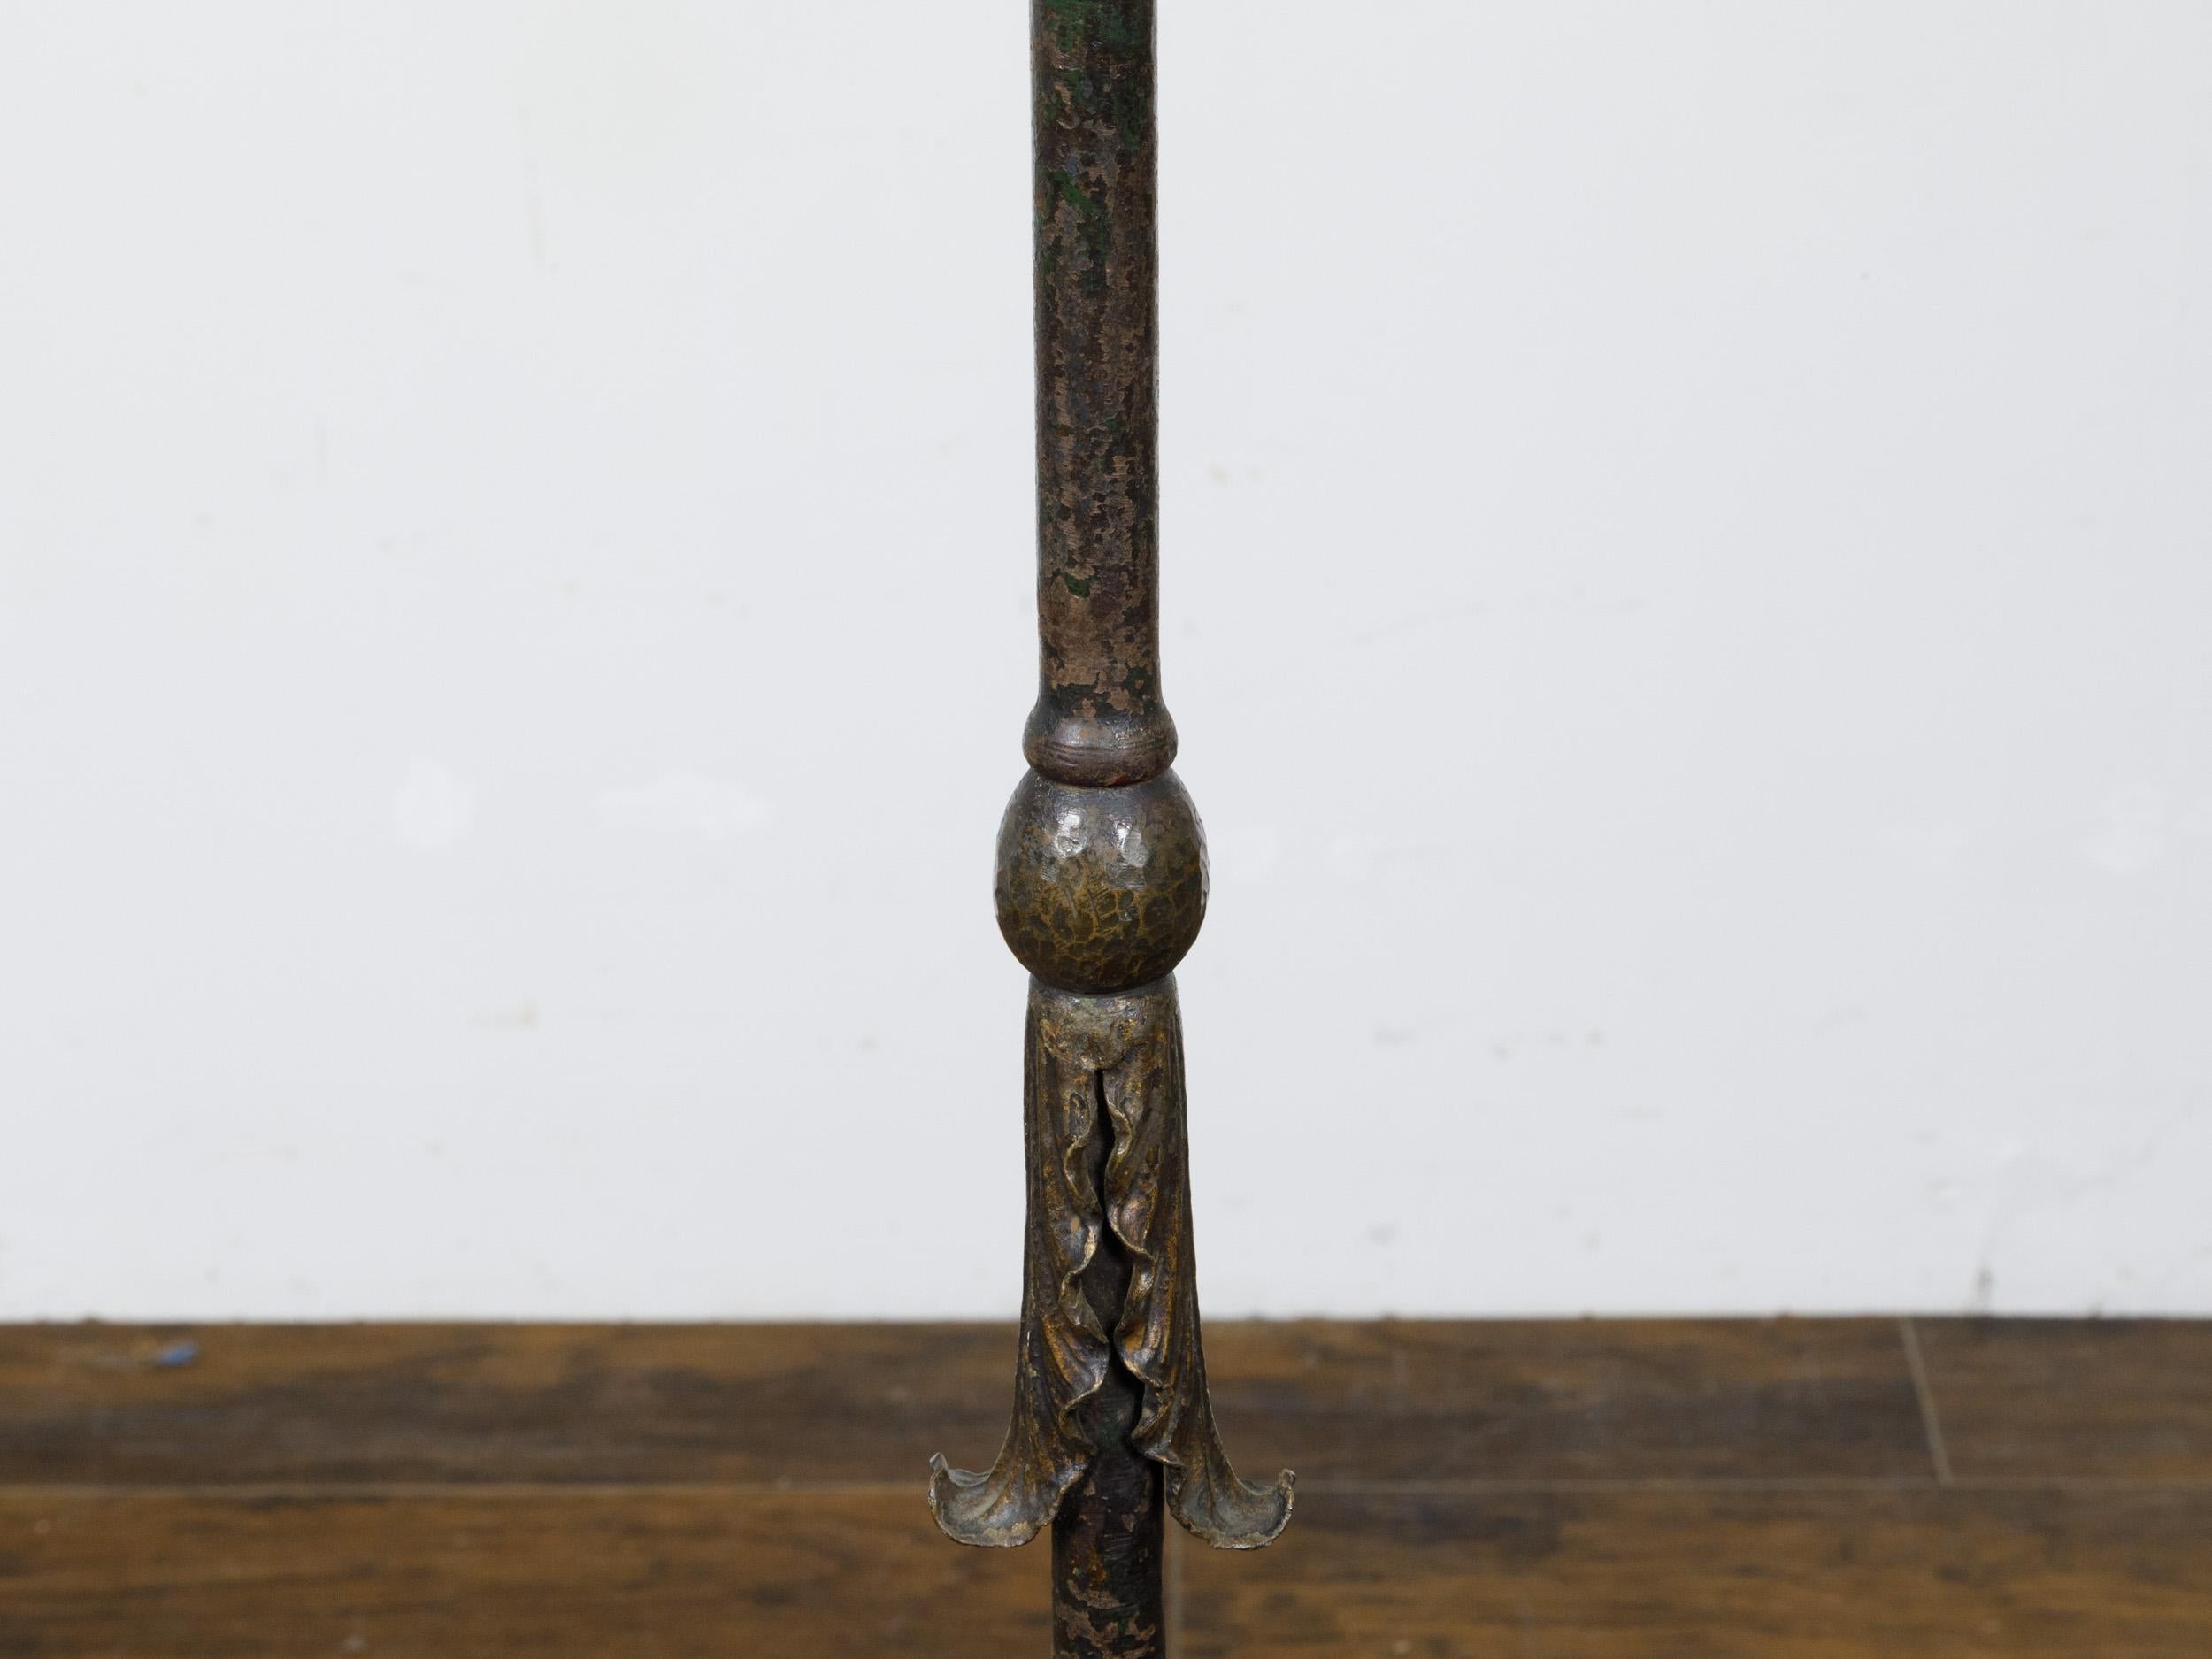 French Steel and Brass 1930s Floor Lamp with Scrolling Legs and Foliage Motifs For Sale 4